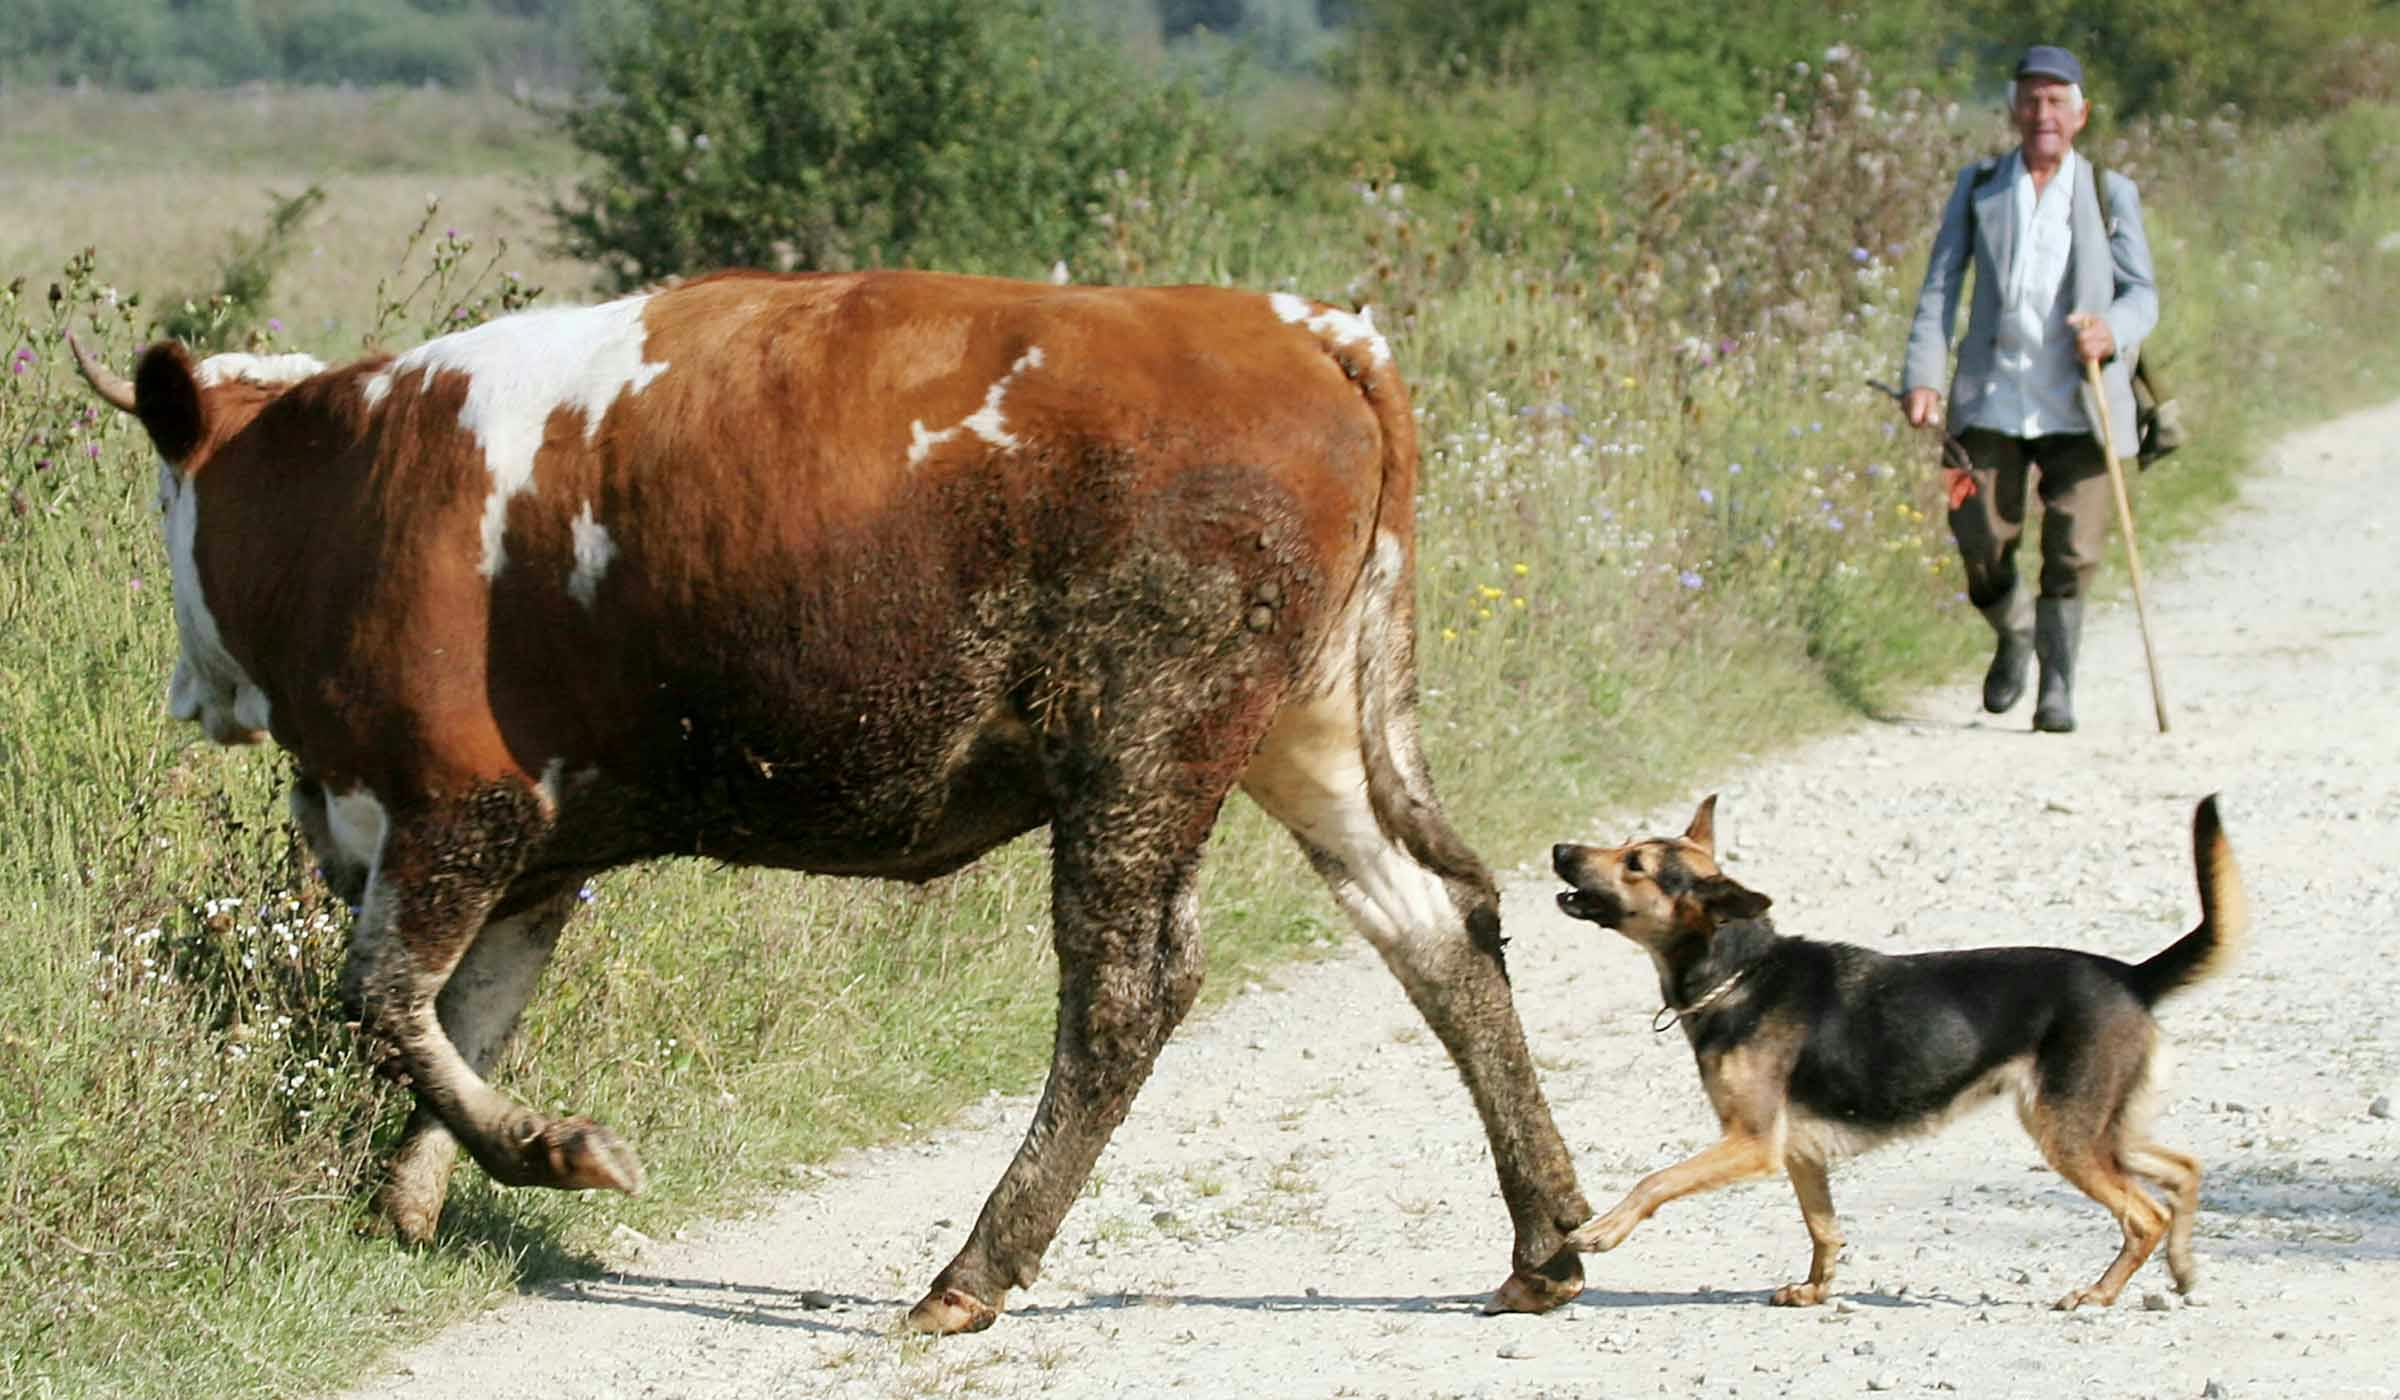 How to Train Your Dog to Not Chase Cows | Wag!